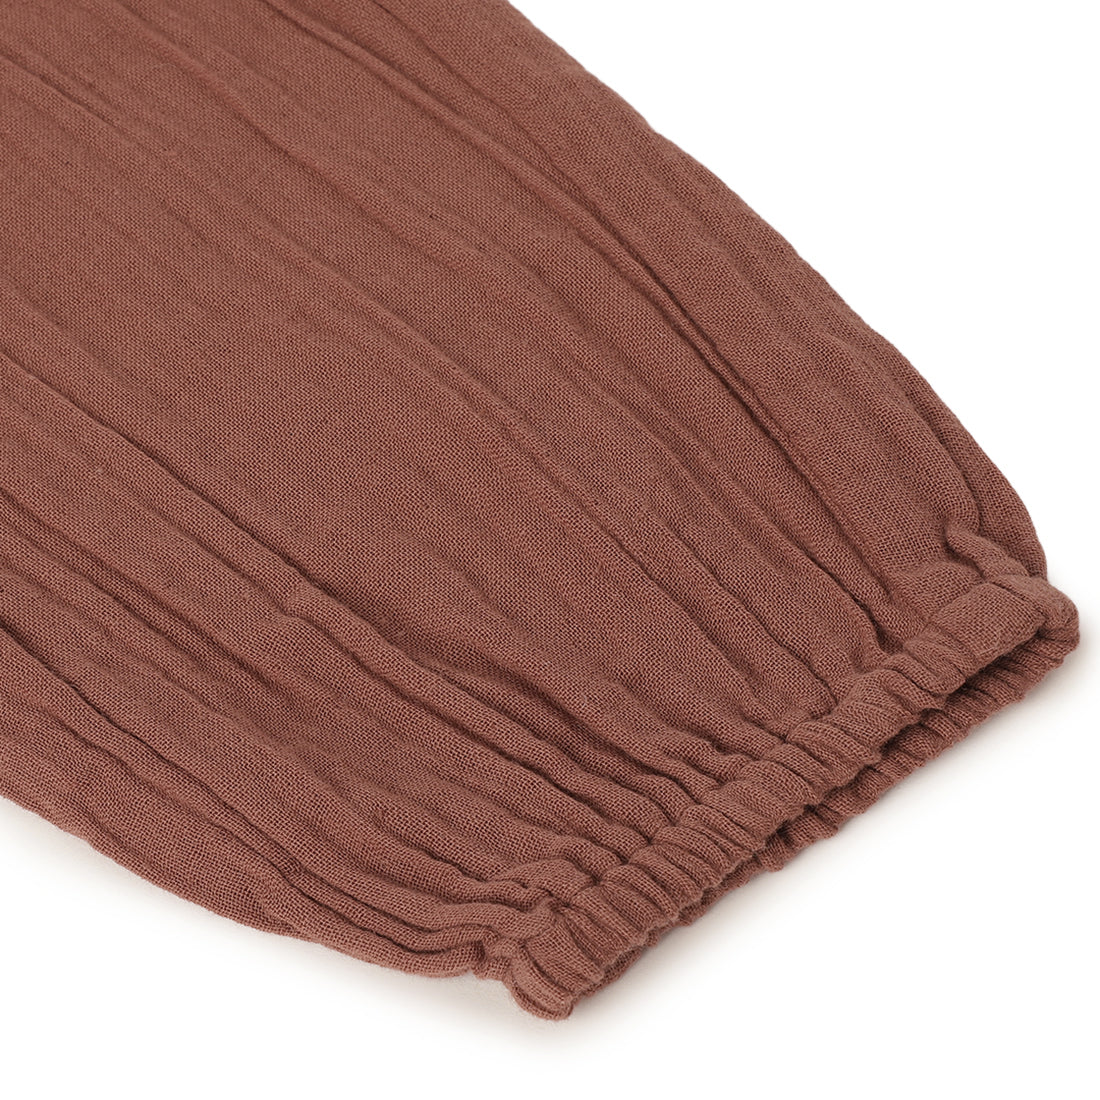 Pants for Boys and Girls , Brown - close up image